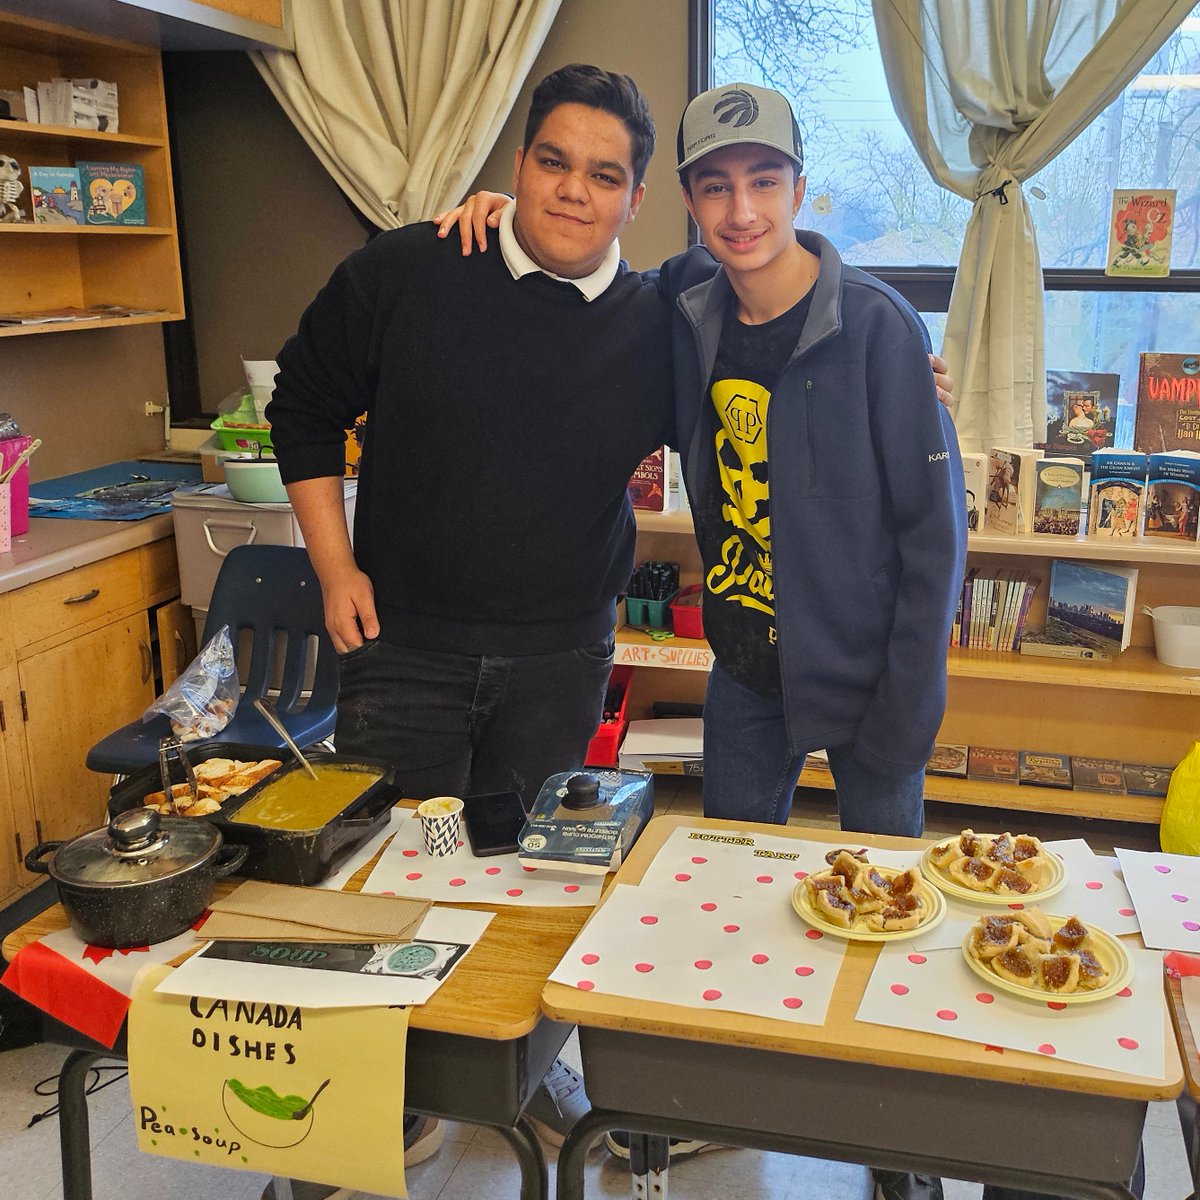 🌟When diplomacy meets delicacy!🌟

Today, in Ms. Shelby's CHV2O civics class, students hosted a Canadian Food Festival to celebrate Canada's rich culture. We are happy to see students come together to organize and celebrate the event!

#UMC #umchighschool #highschool #canada